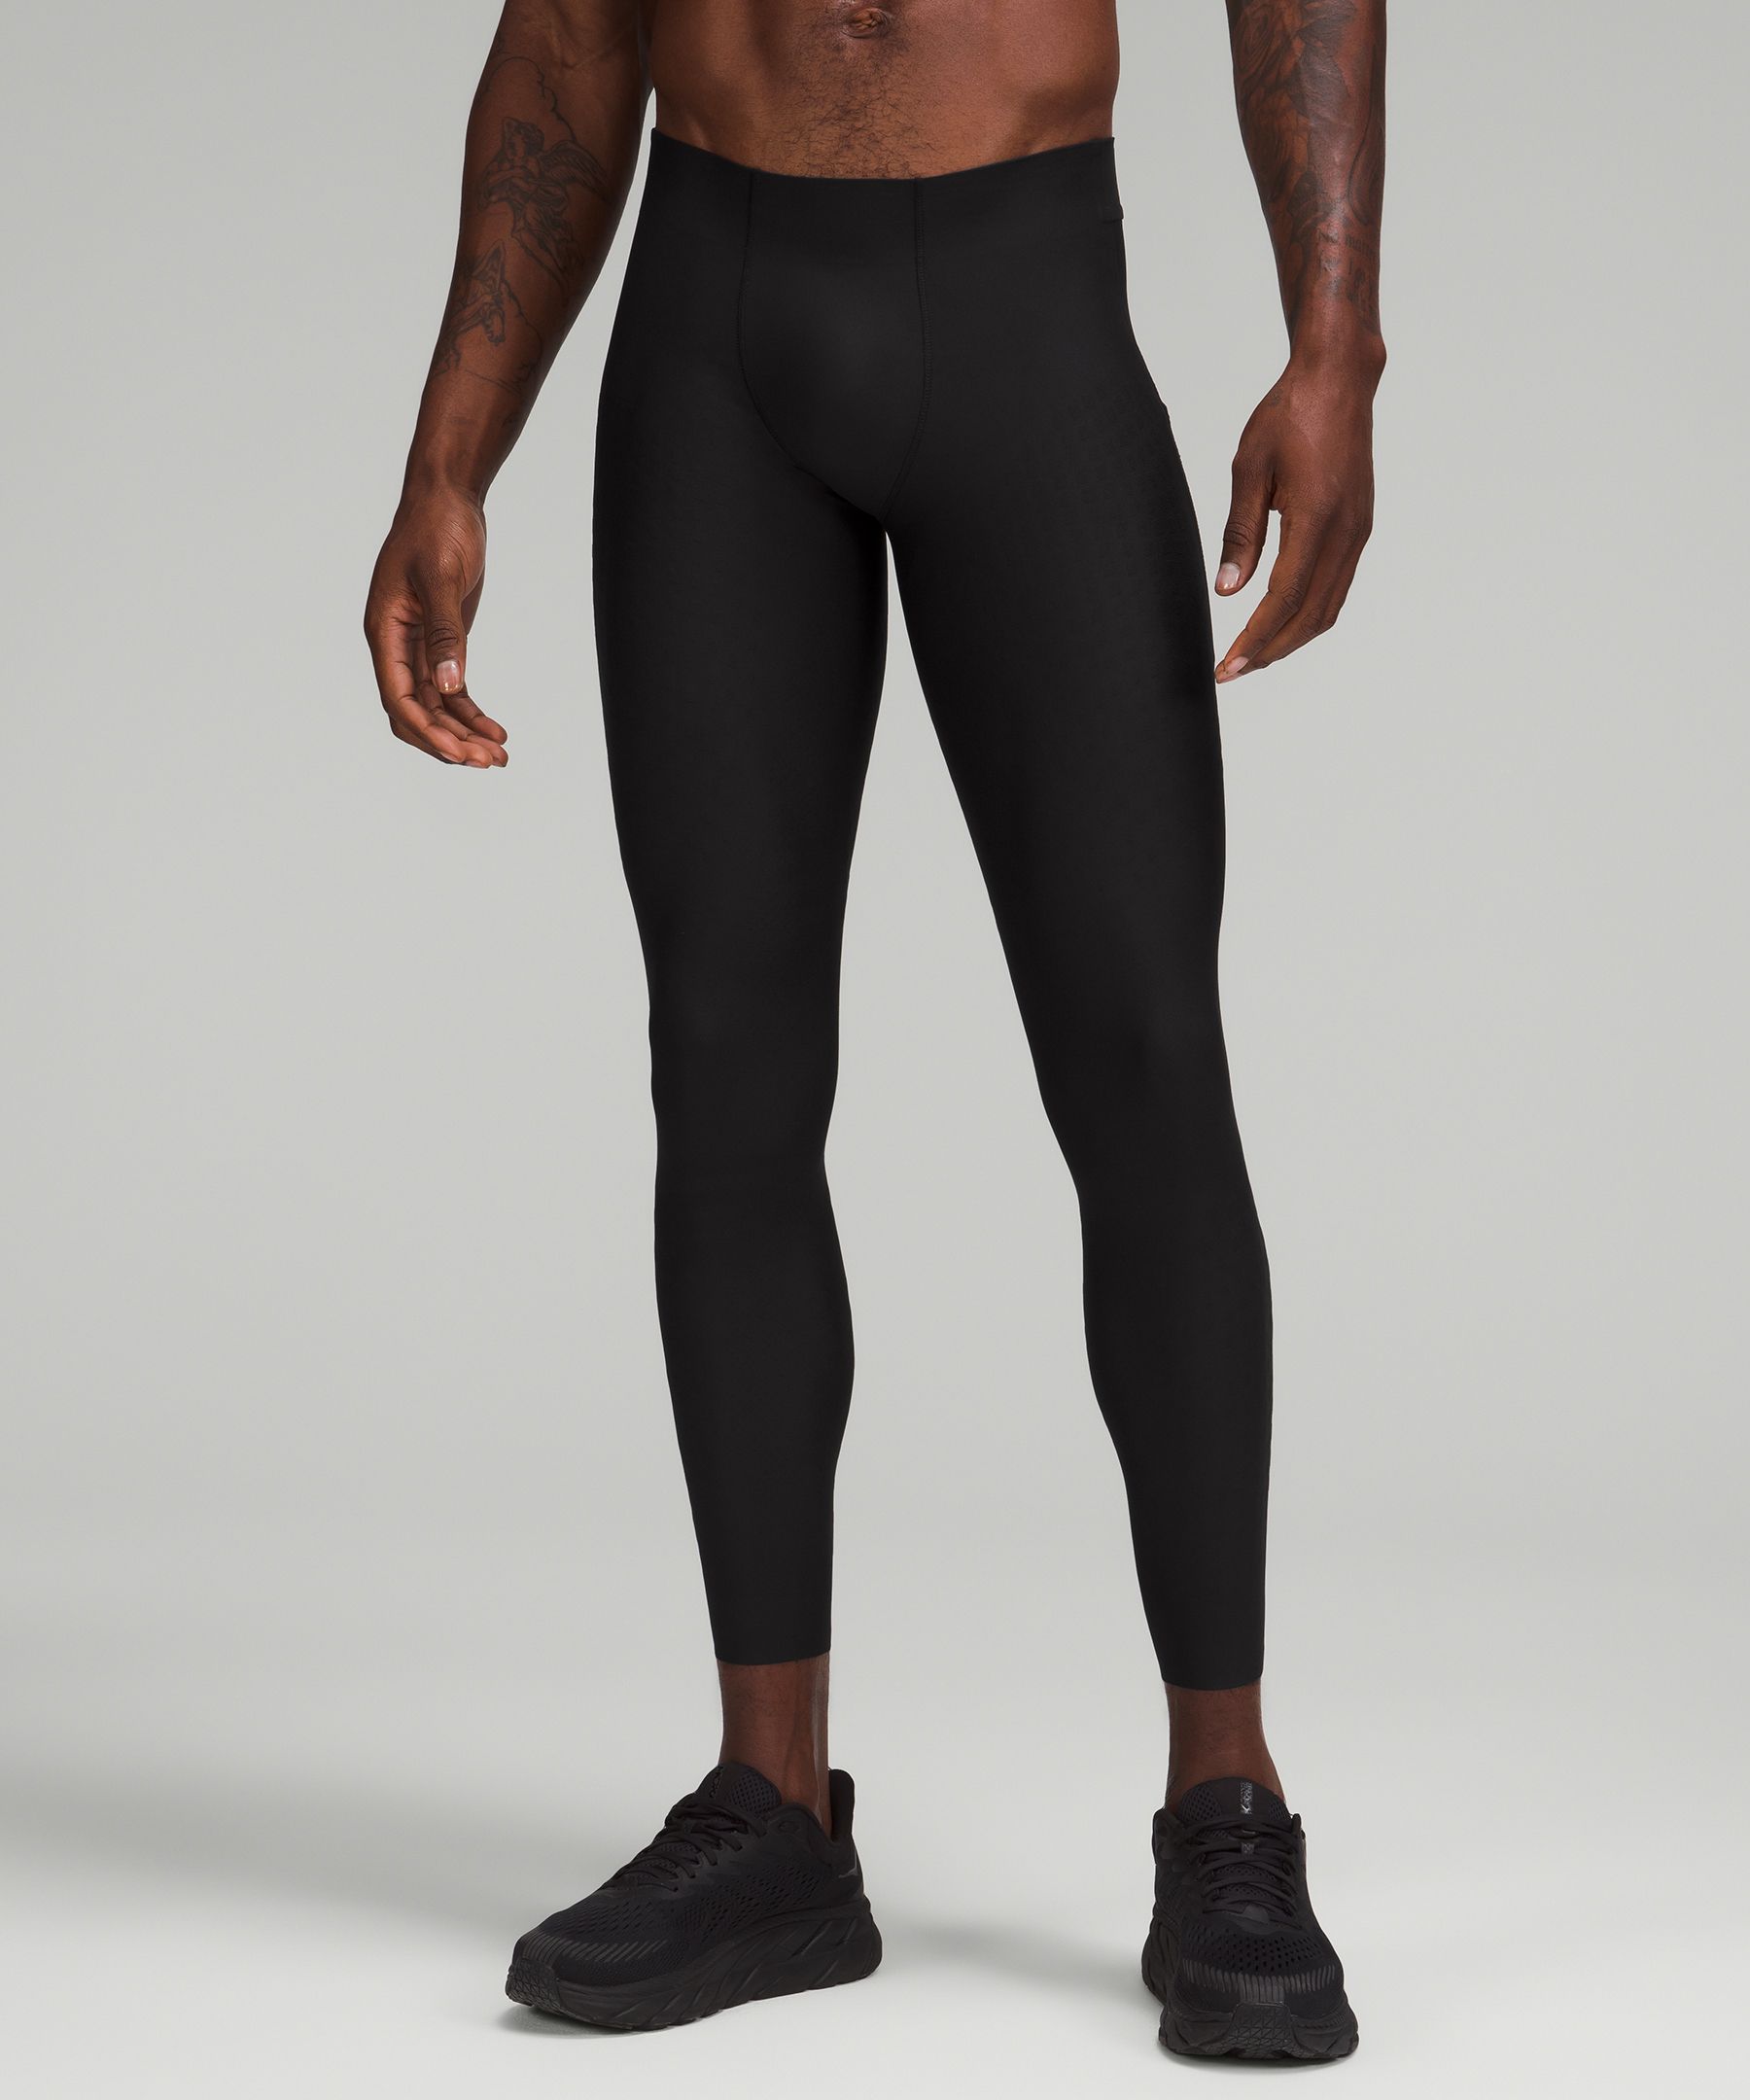 Fast and Free Tight 28, Men's Leggings/Tights, lululemon